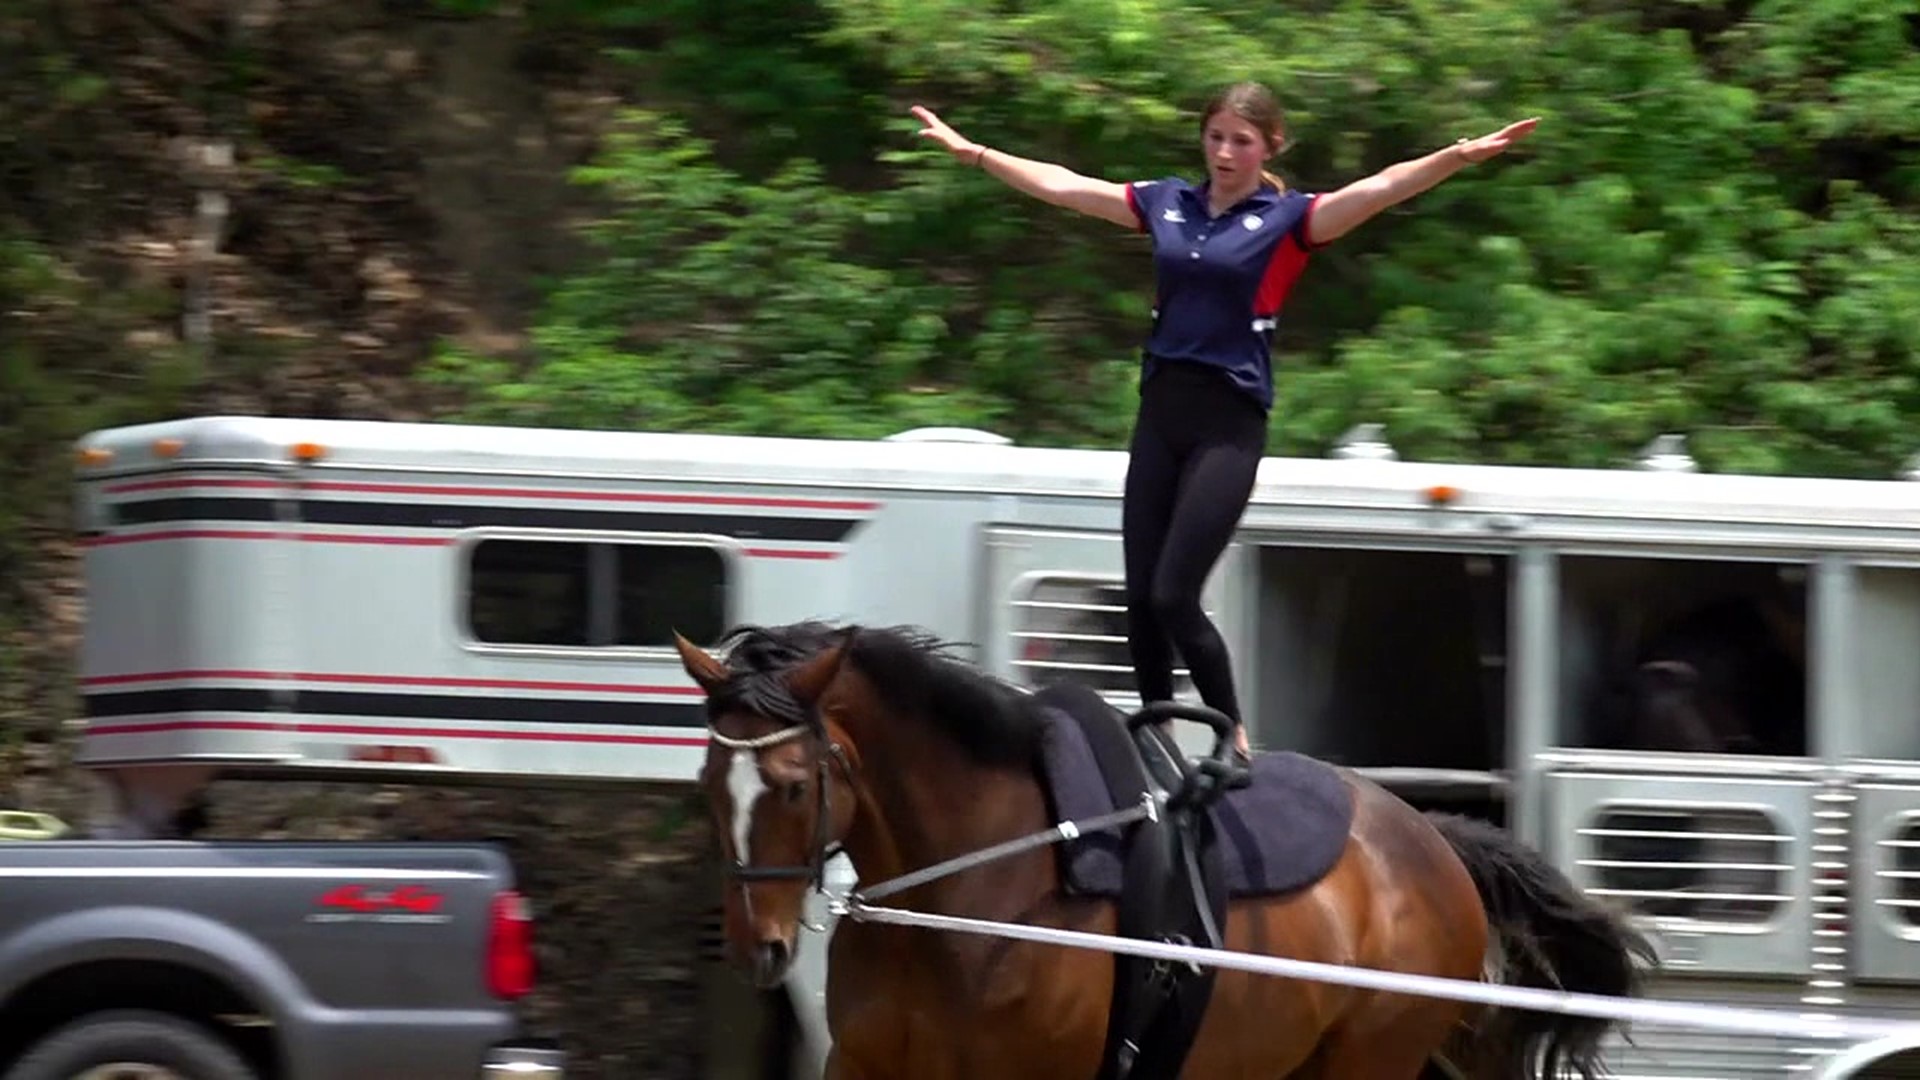 To support a national-winning equestrian vaulter, many spent the afternoon cheering her on as she trains for an international competition.